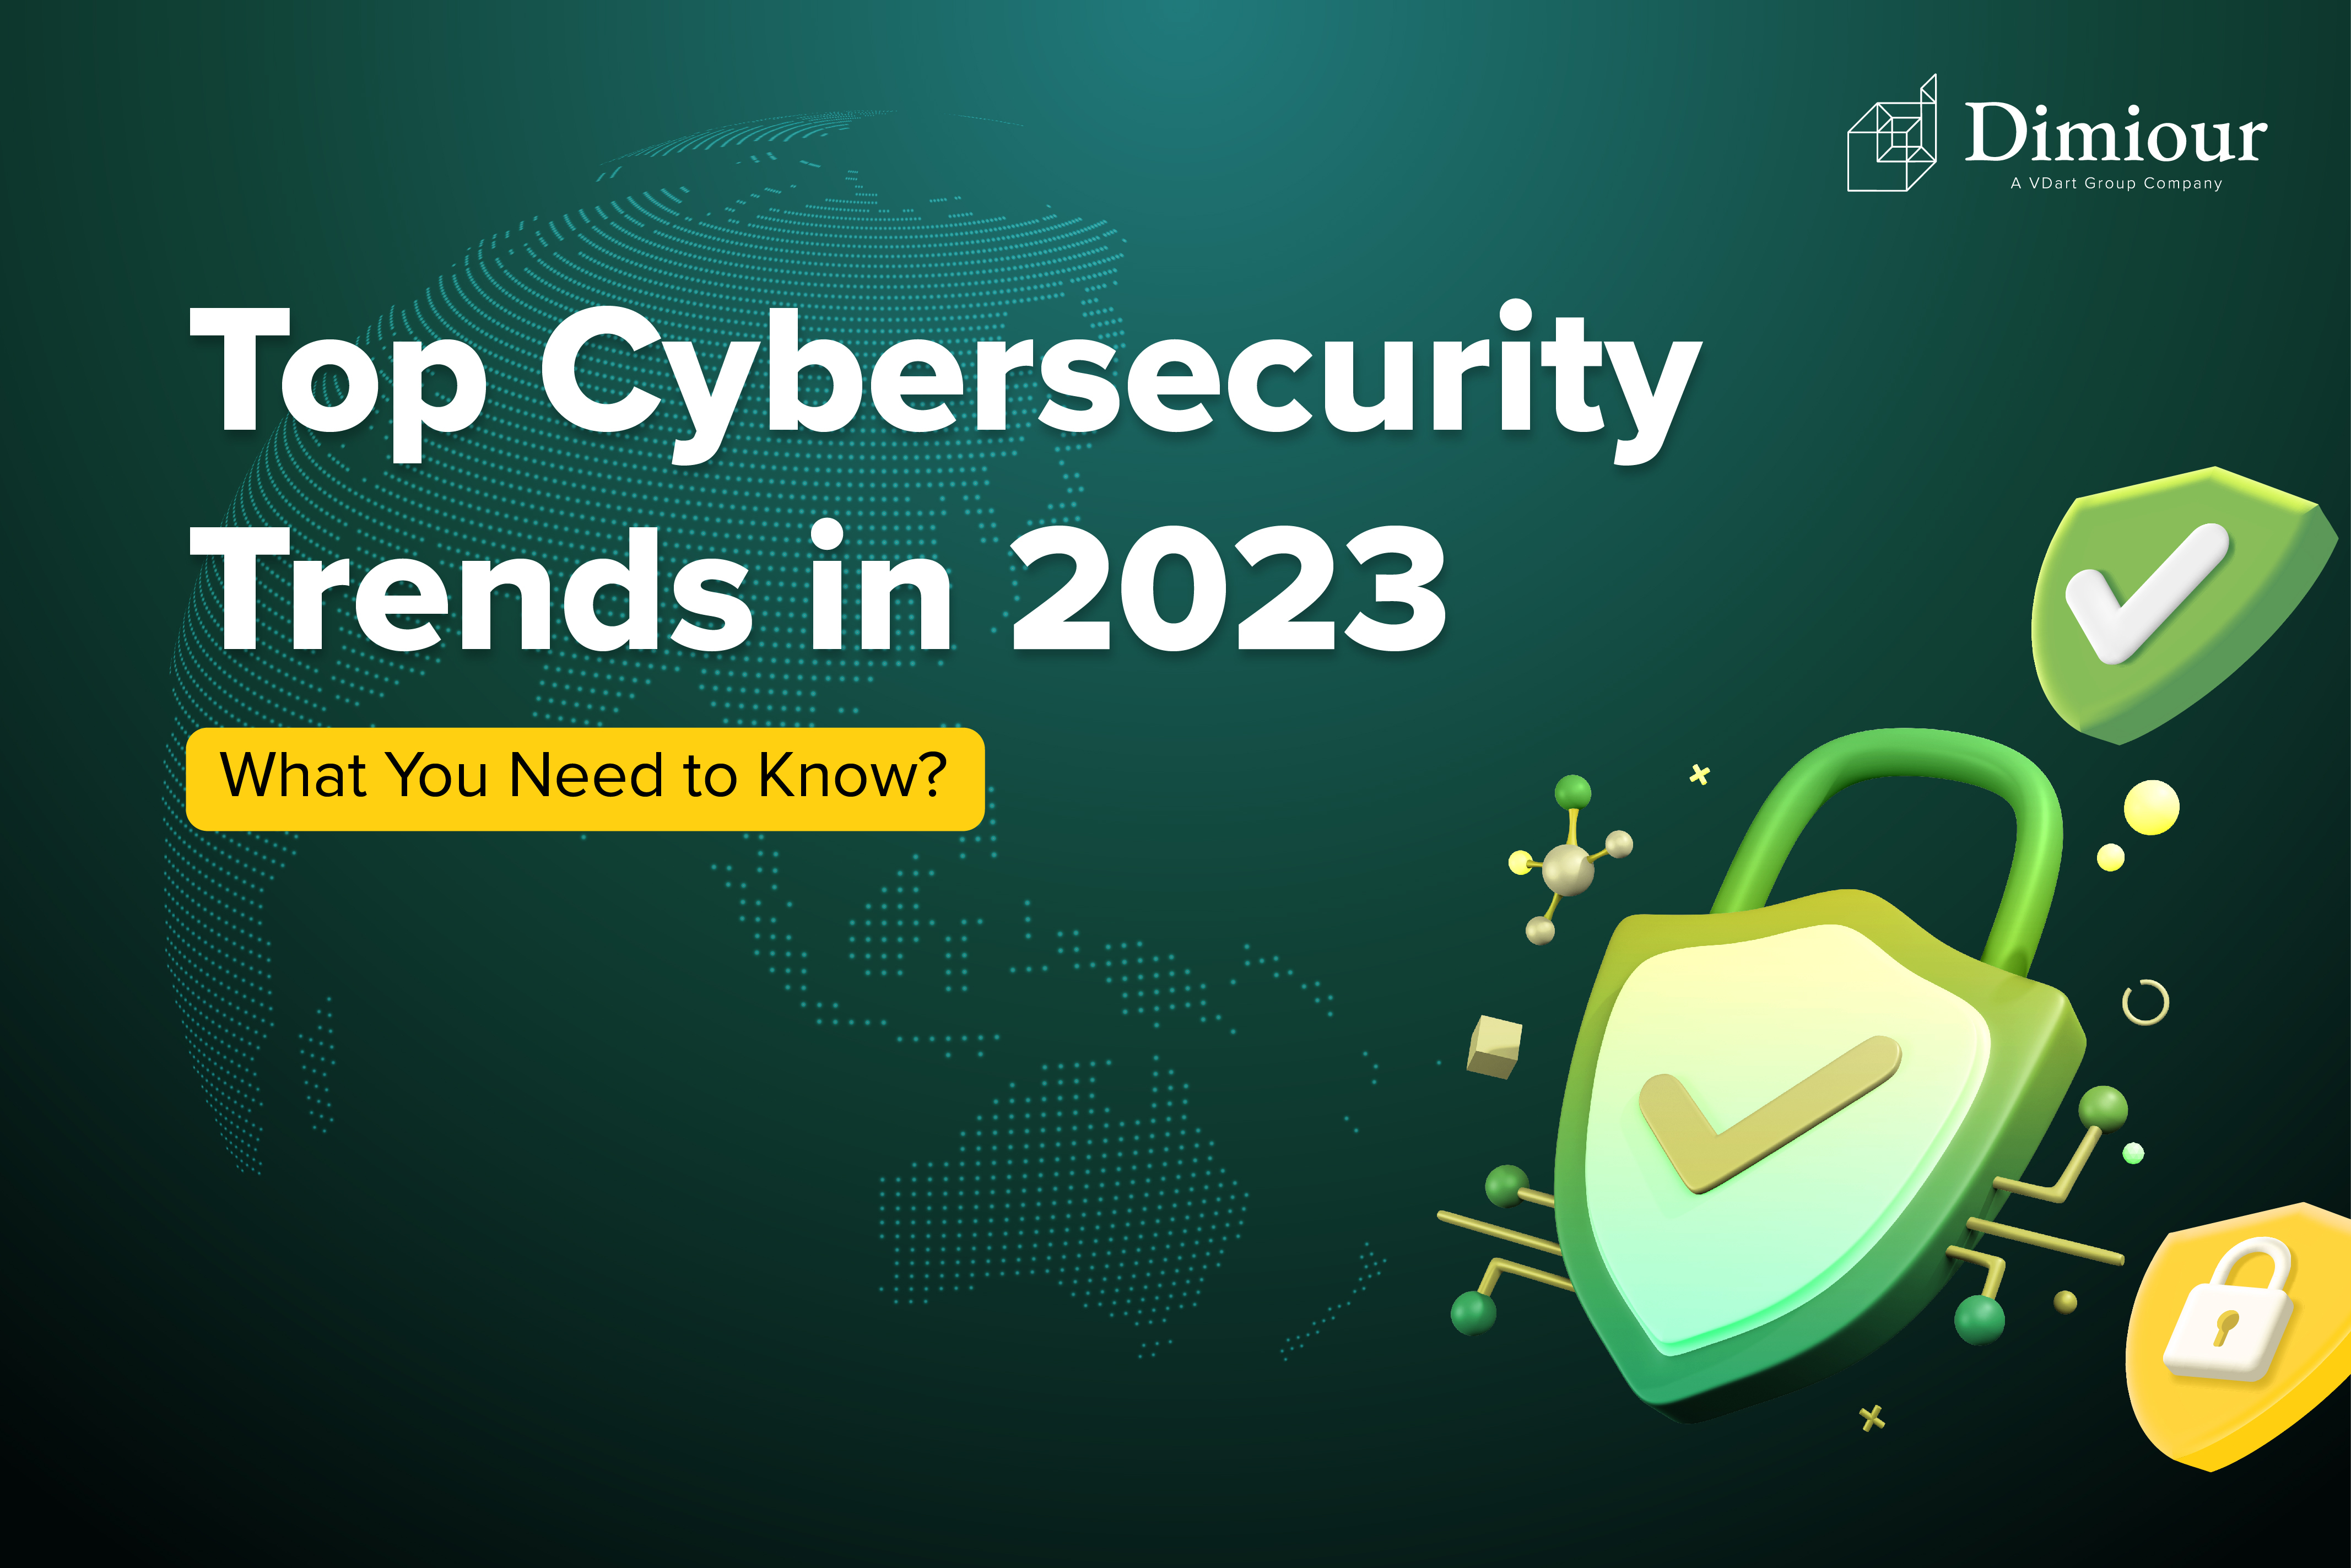 Top Cybersecurity Trends in 2023: What You Need to Know